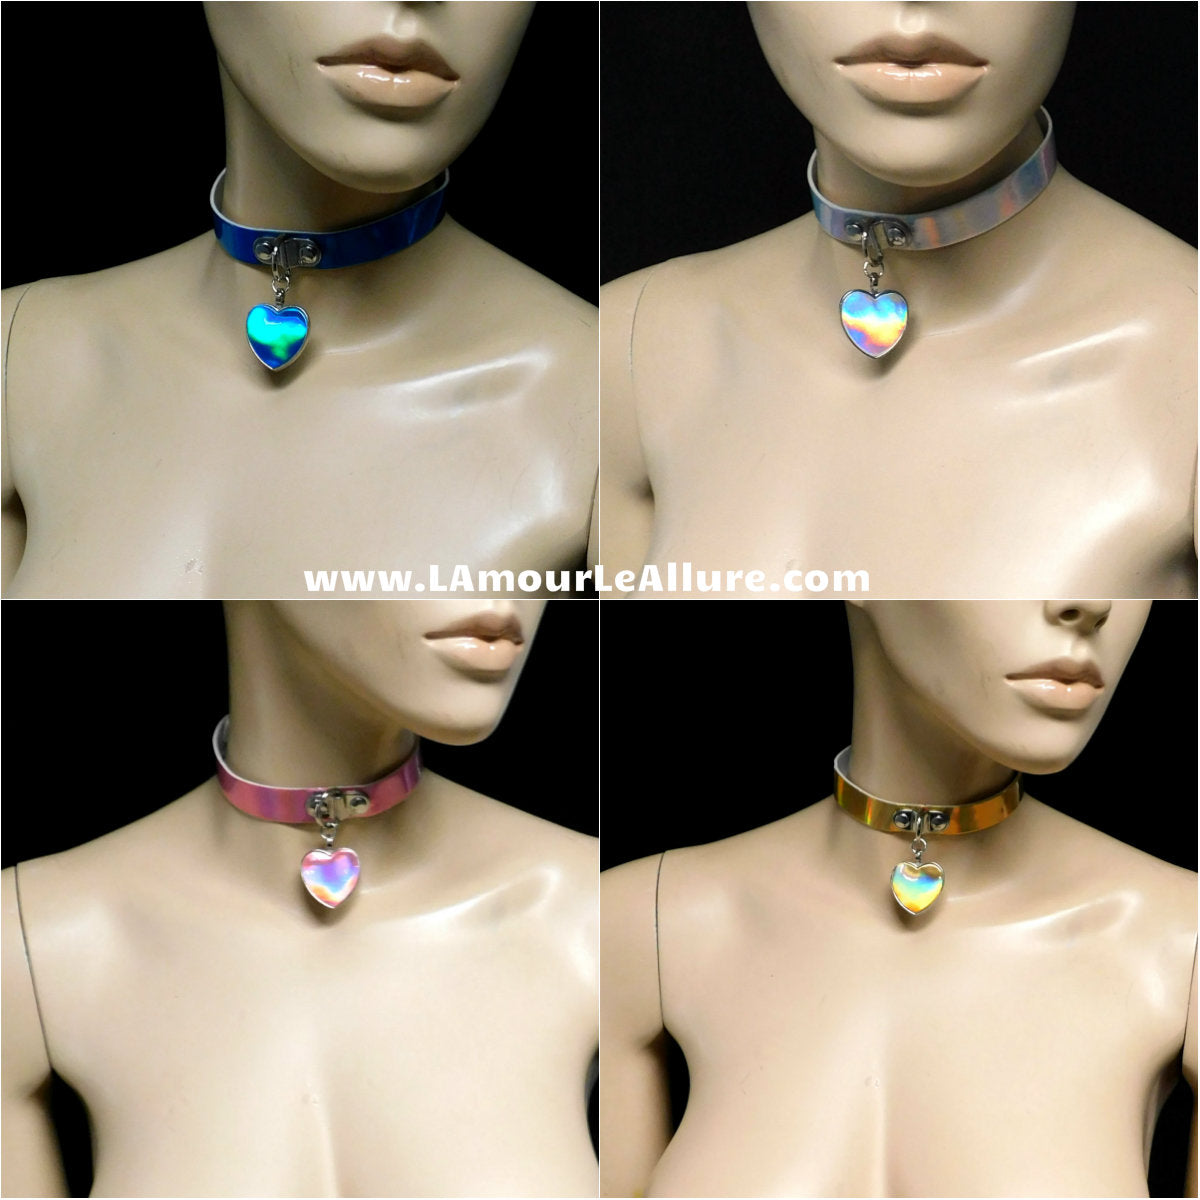 Holographic Choker Necklace with Heart Pendant